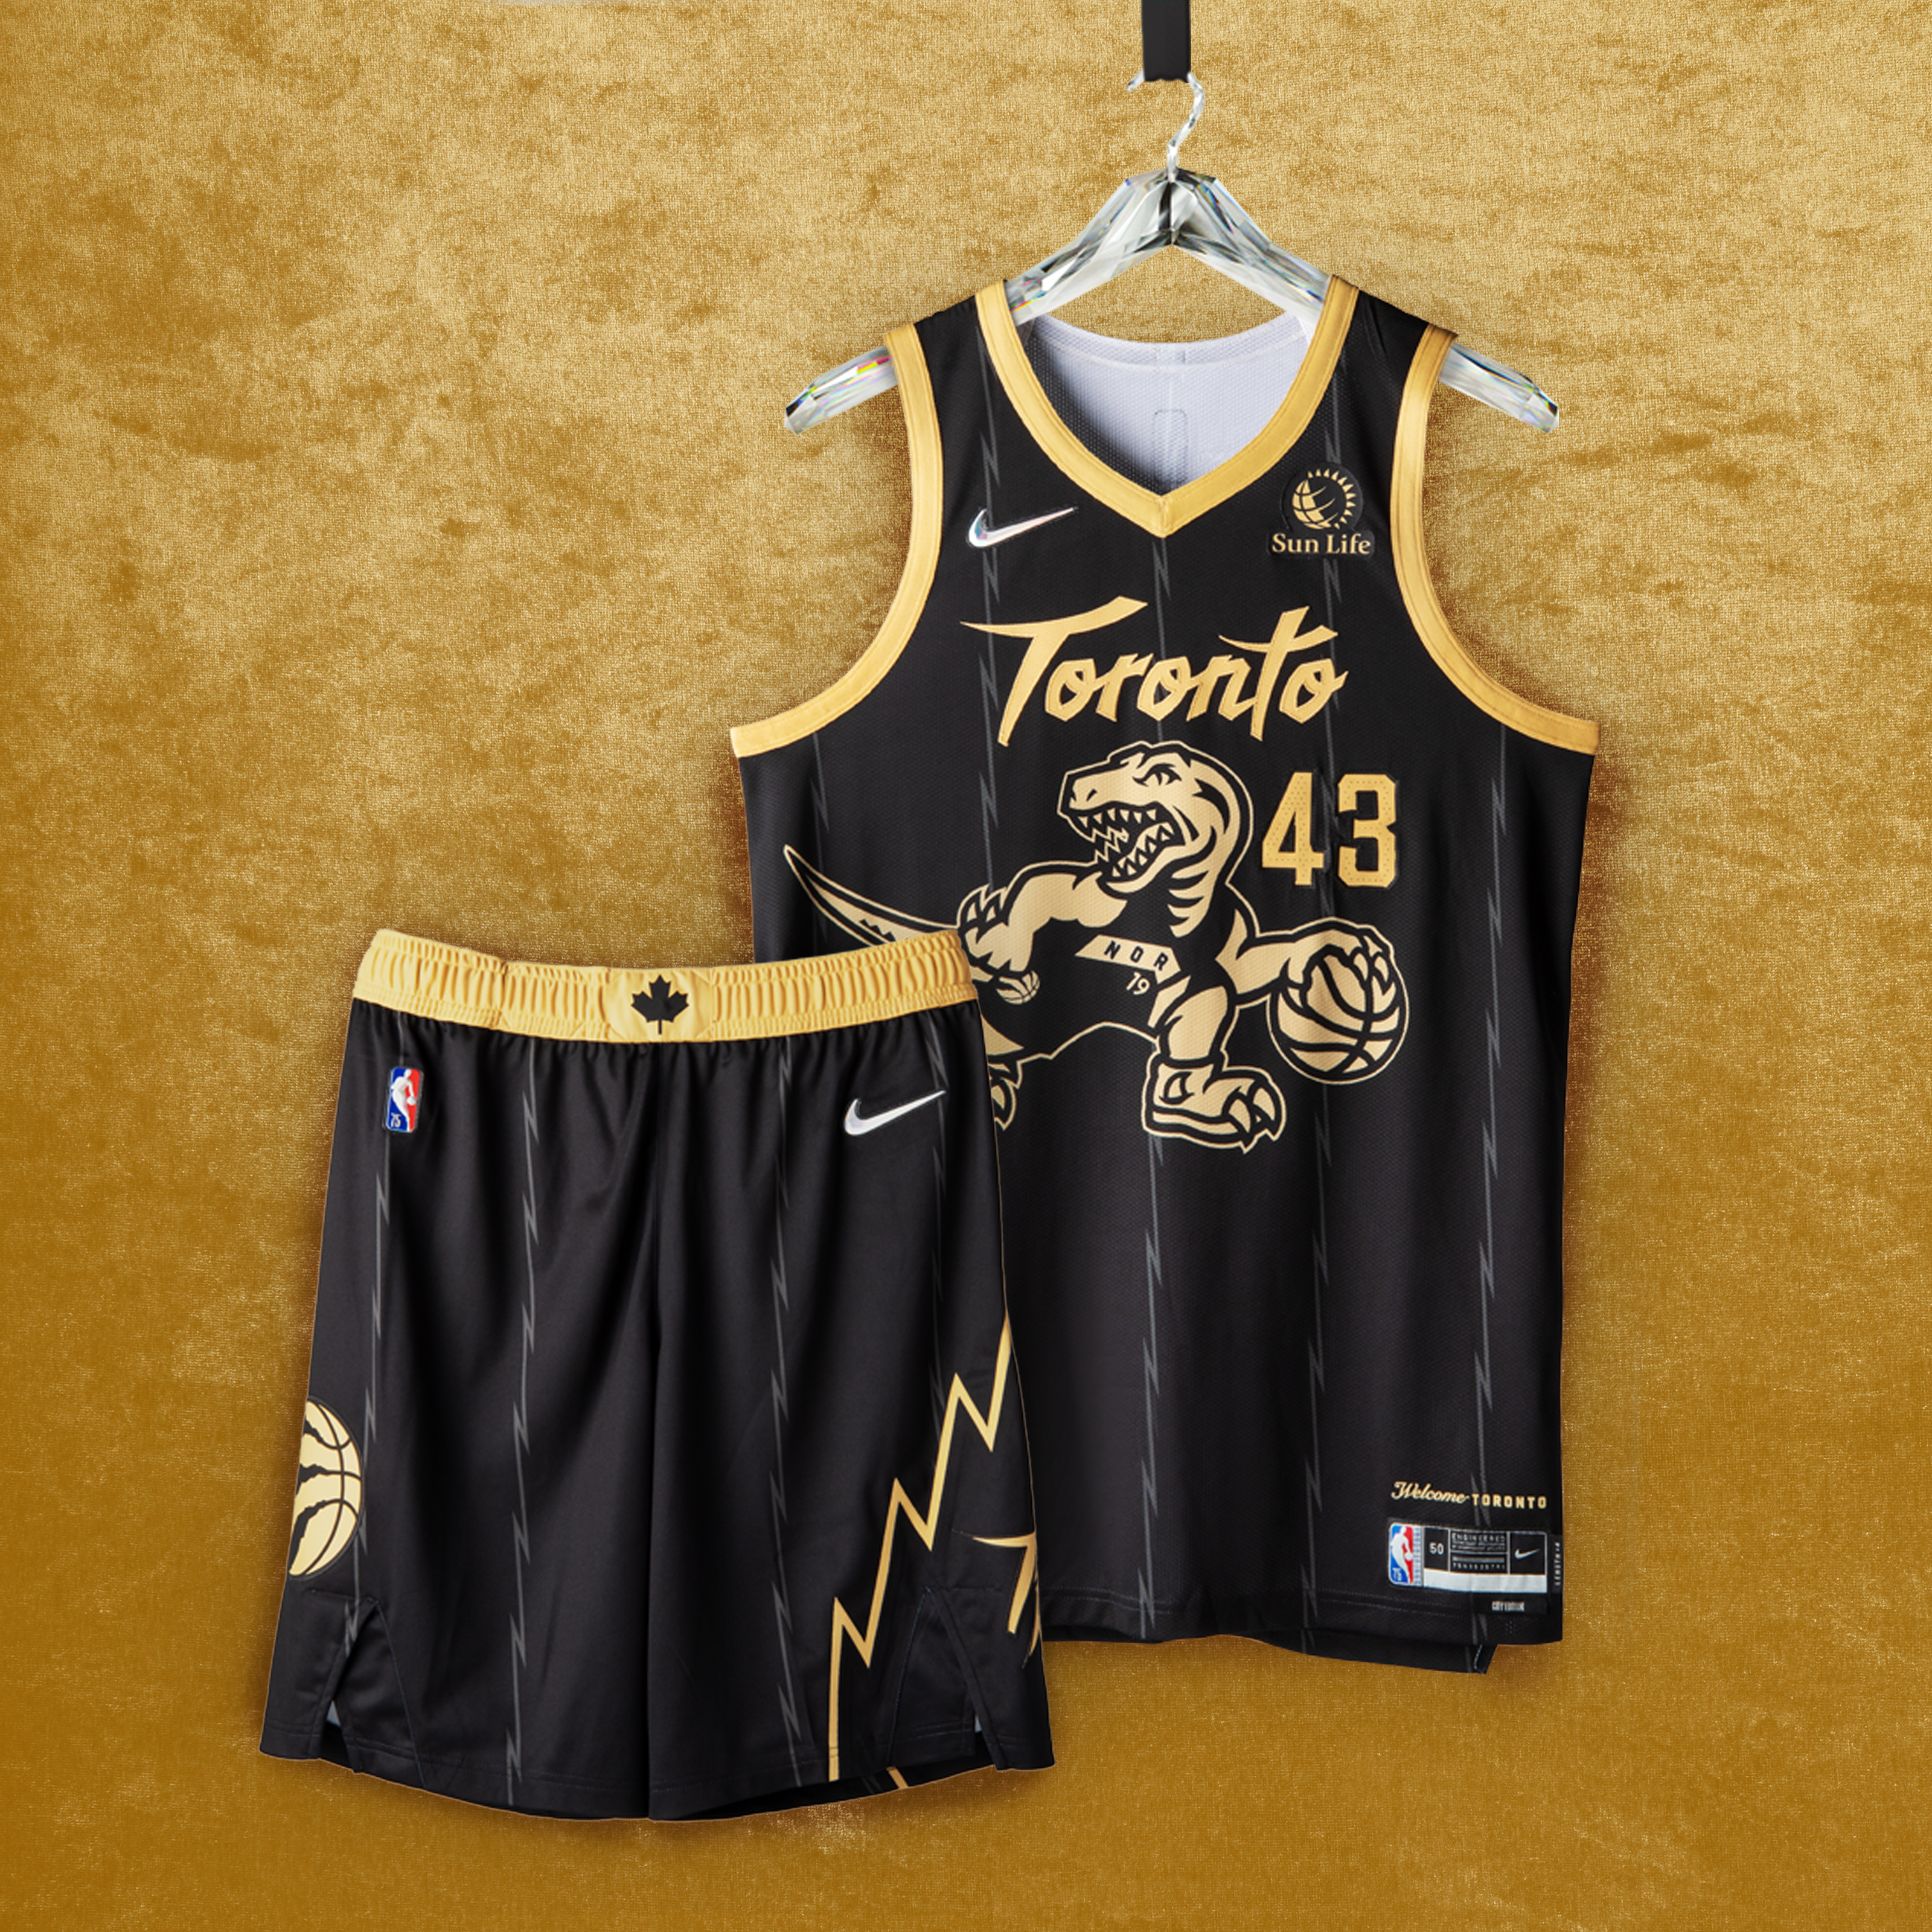 Toronto Raptors Five Daily Thoughts: New city edition jerseys